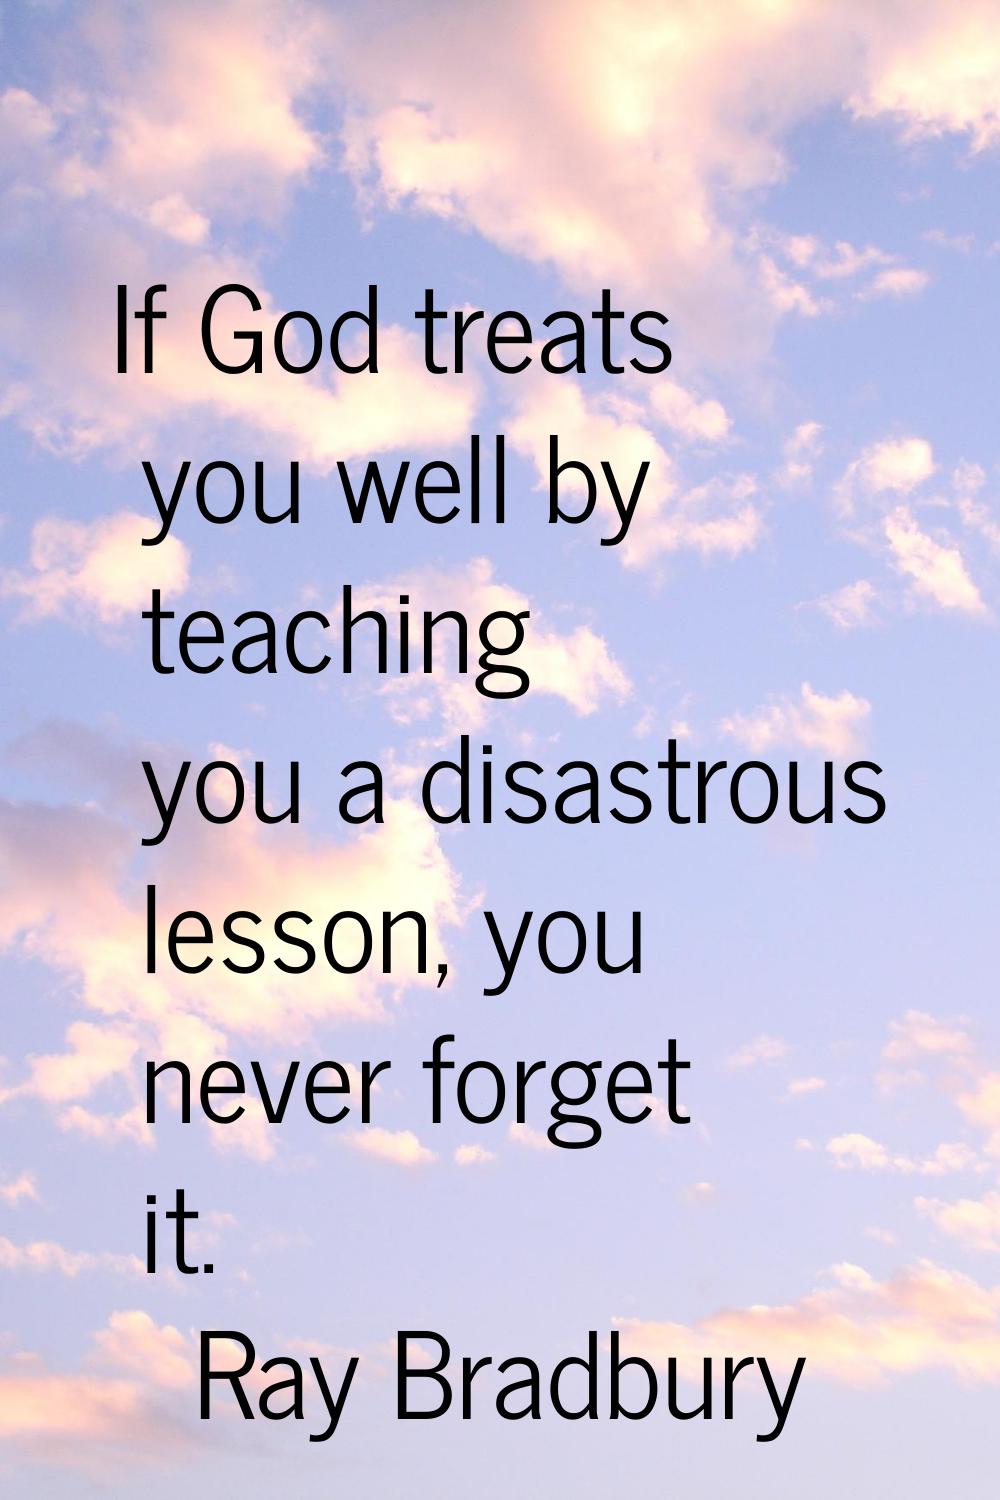 If God treats you well by teaching you a disastrous lesson, you never forget it.